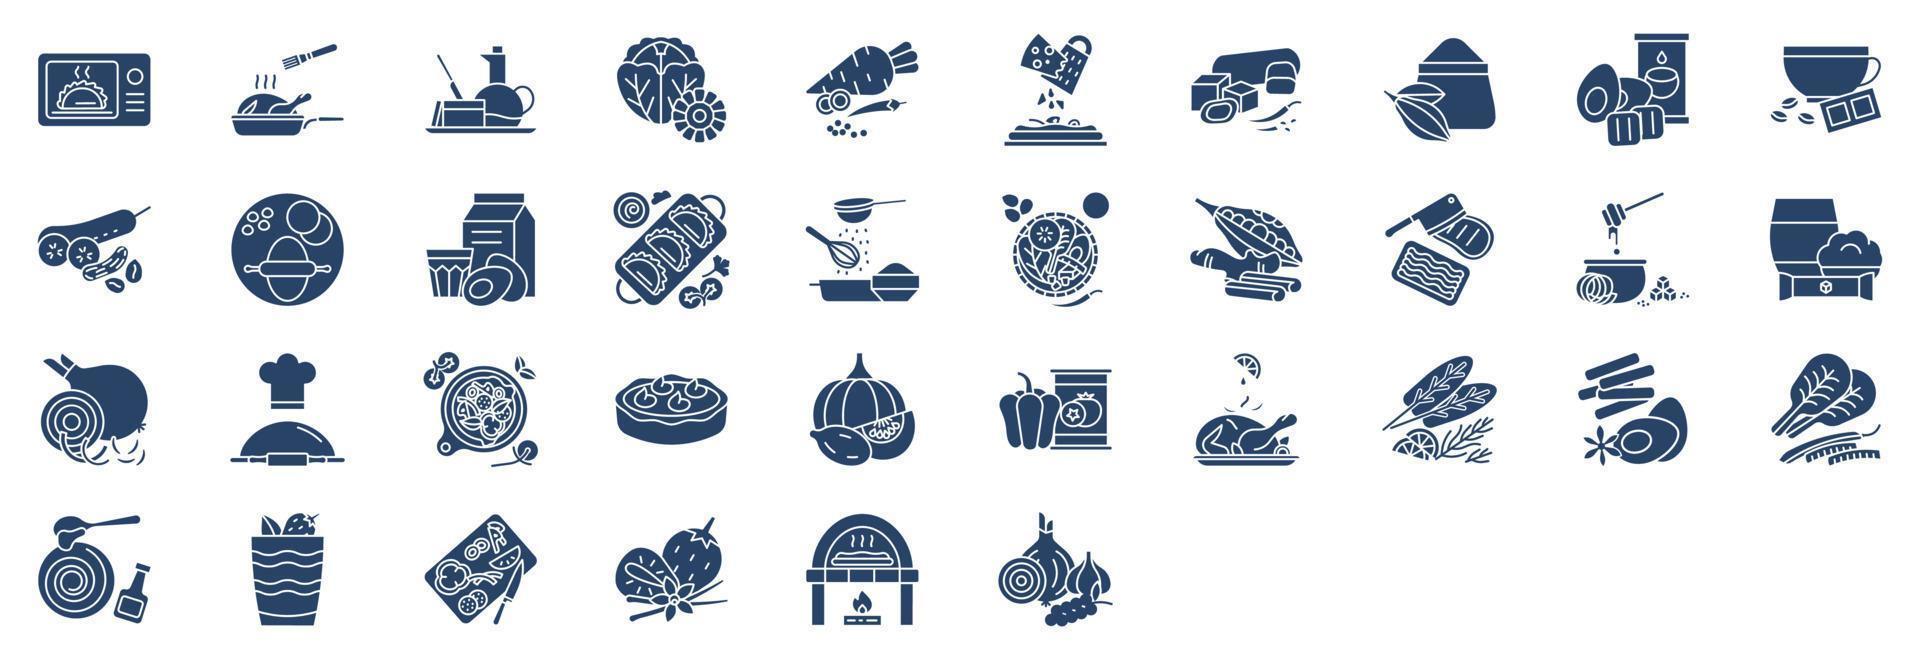 Collection of icons related to Recipes and ingredients, including icons like Baking, coffee, pumpkin pie, Pizza and more. vector illustrations, Pixel Perfect set